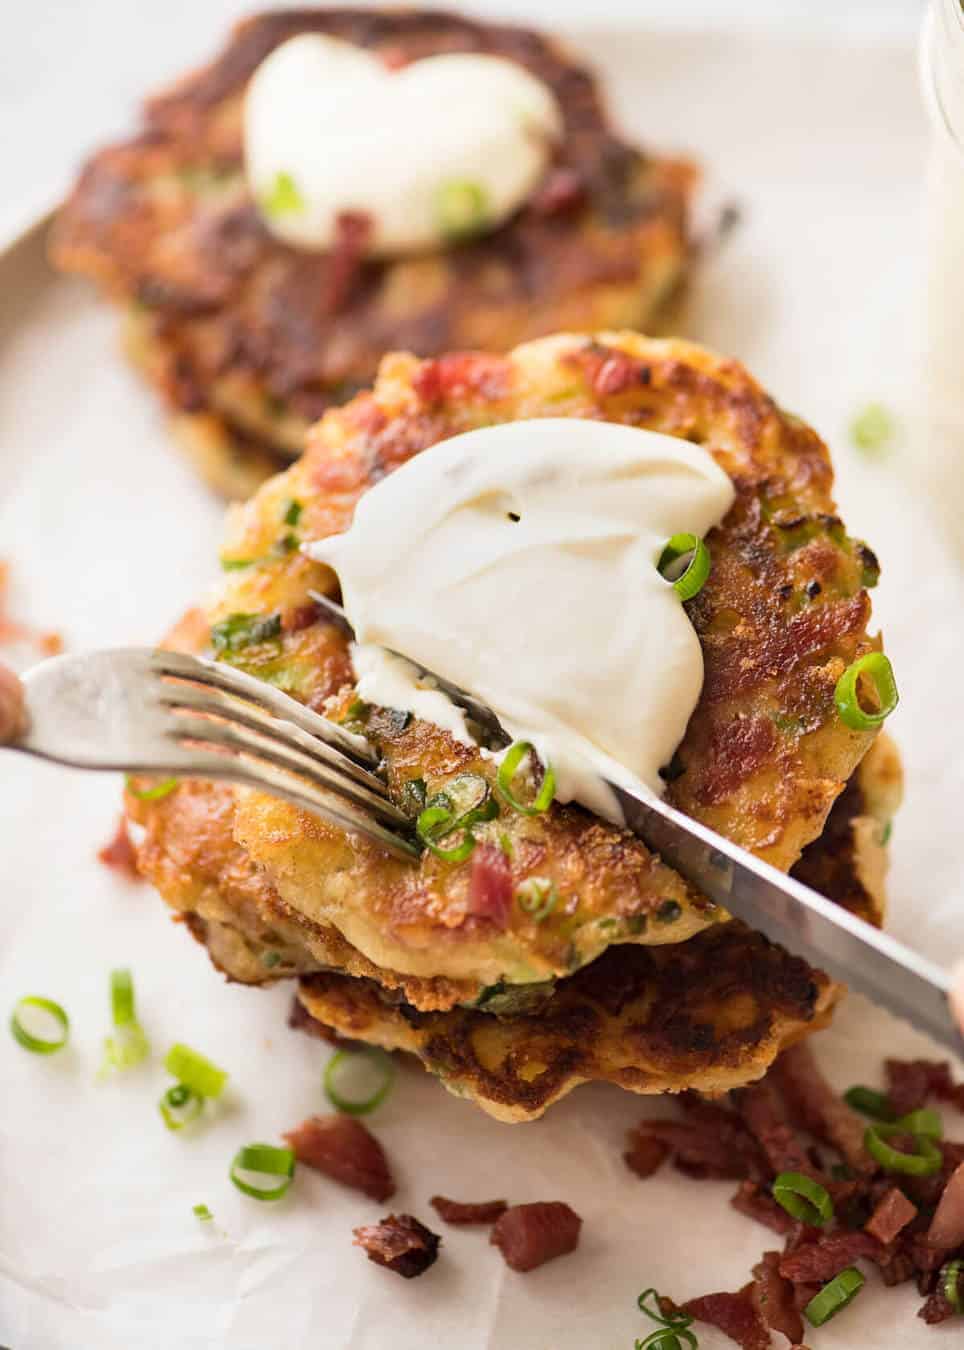 Cheese and Ham Pancakes - golden crispy cheesy outsides, fluffy insides with pops of ham (or bacon). These are epic! www.recipetineats.com